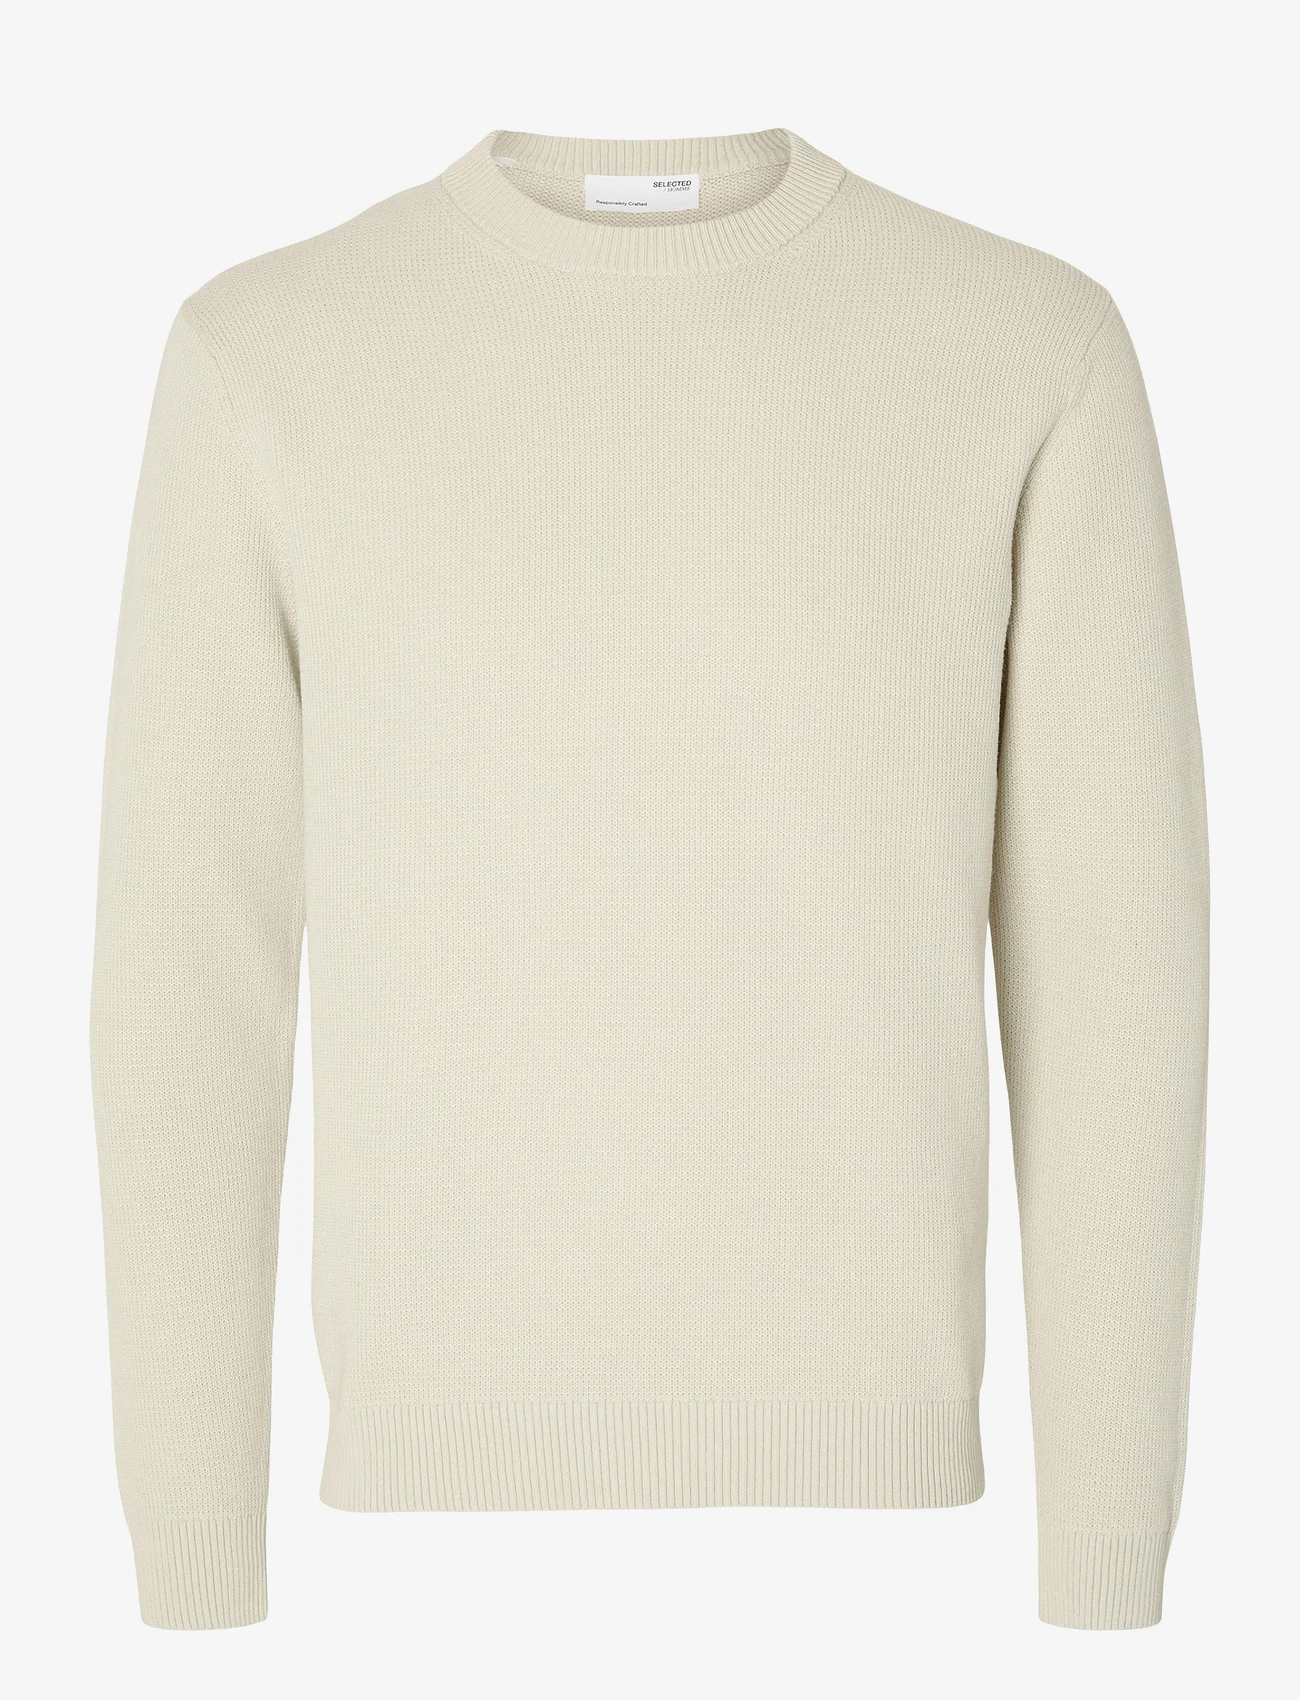 Selected Homme - SLHDANE LS KNIT STRUCTURE CREW NECK NOOS - rund hals - oatmeal - 0